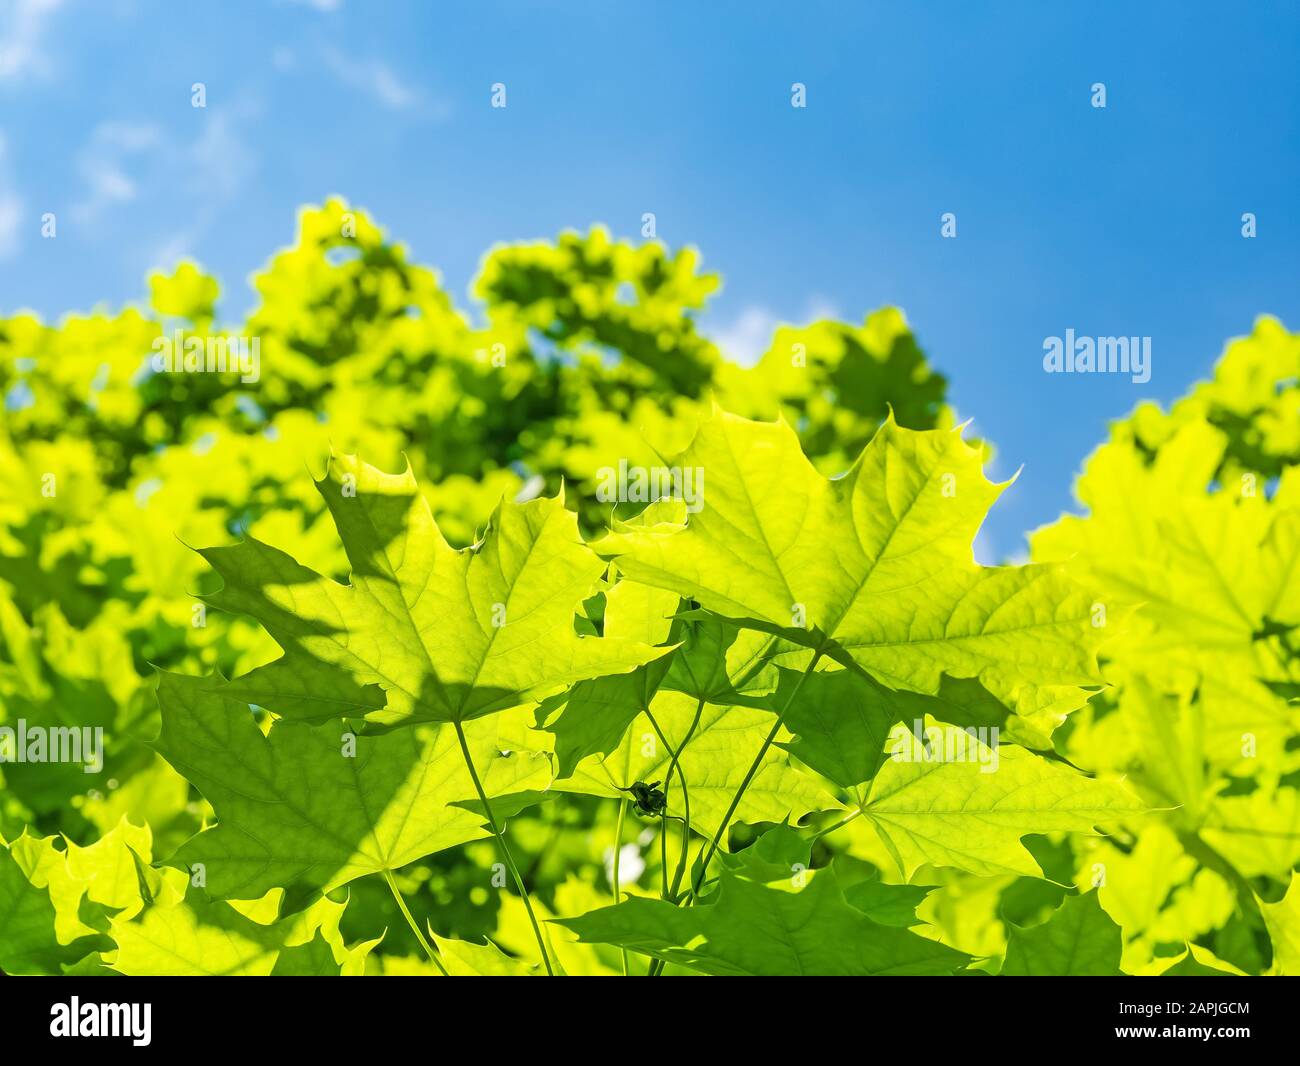 Green maple tree against blue sky with sun Stock Photo